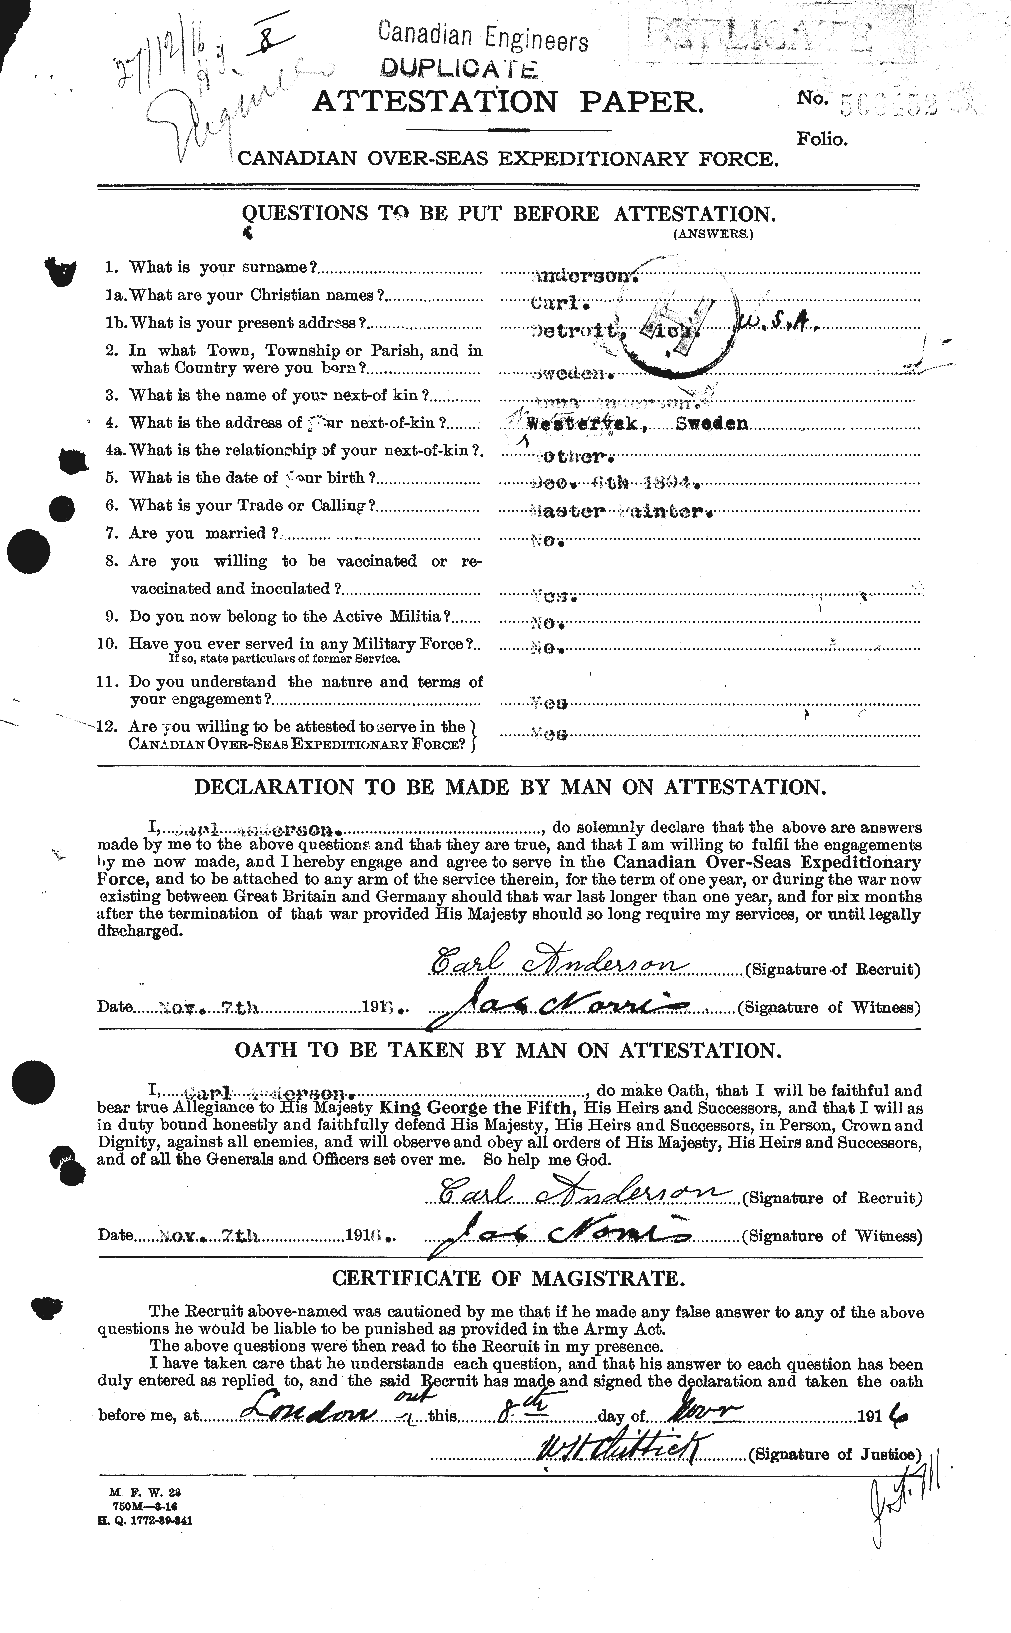 Personnel Records of the First World War - CEF 209295a